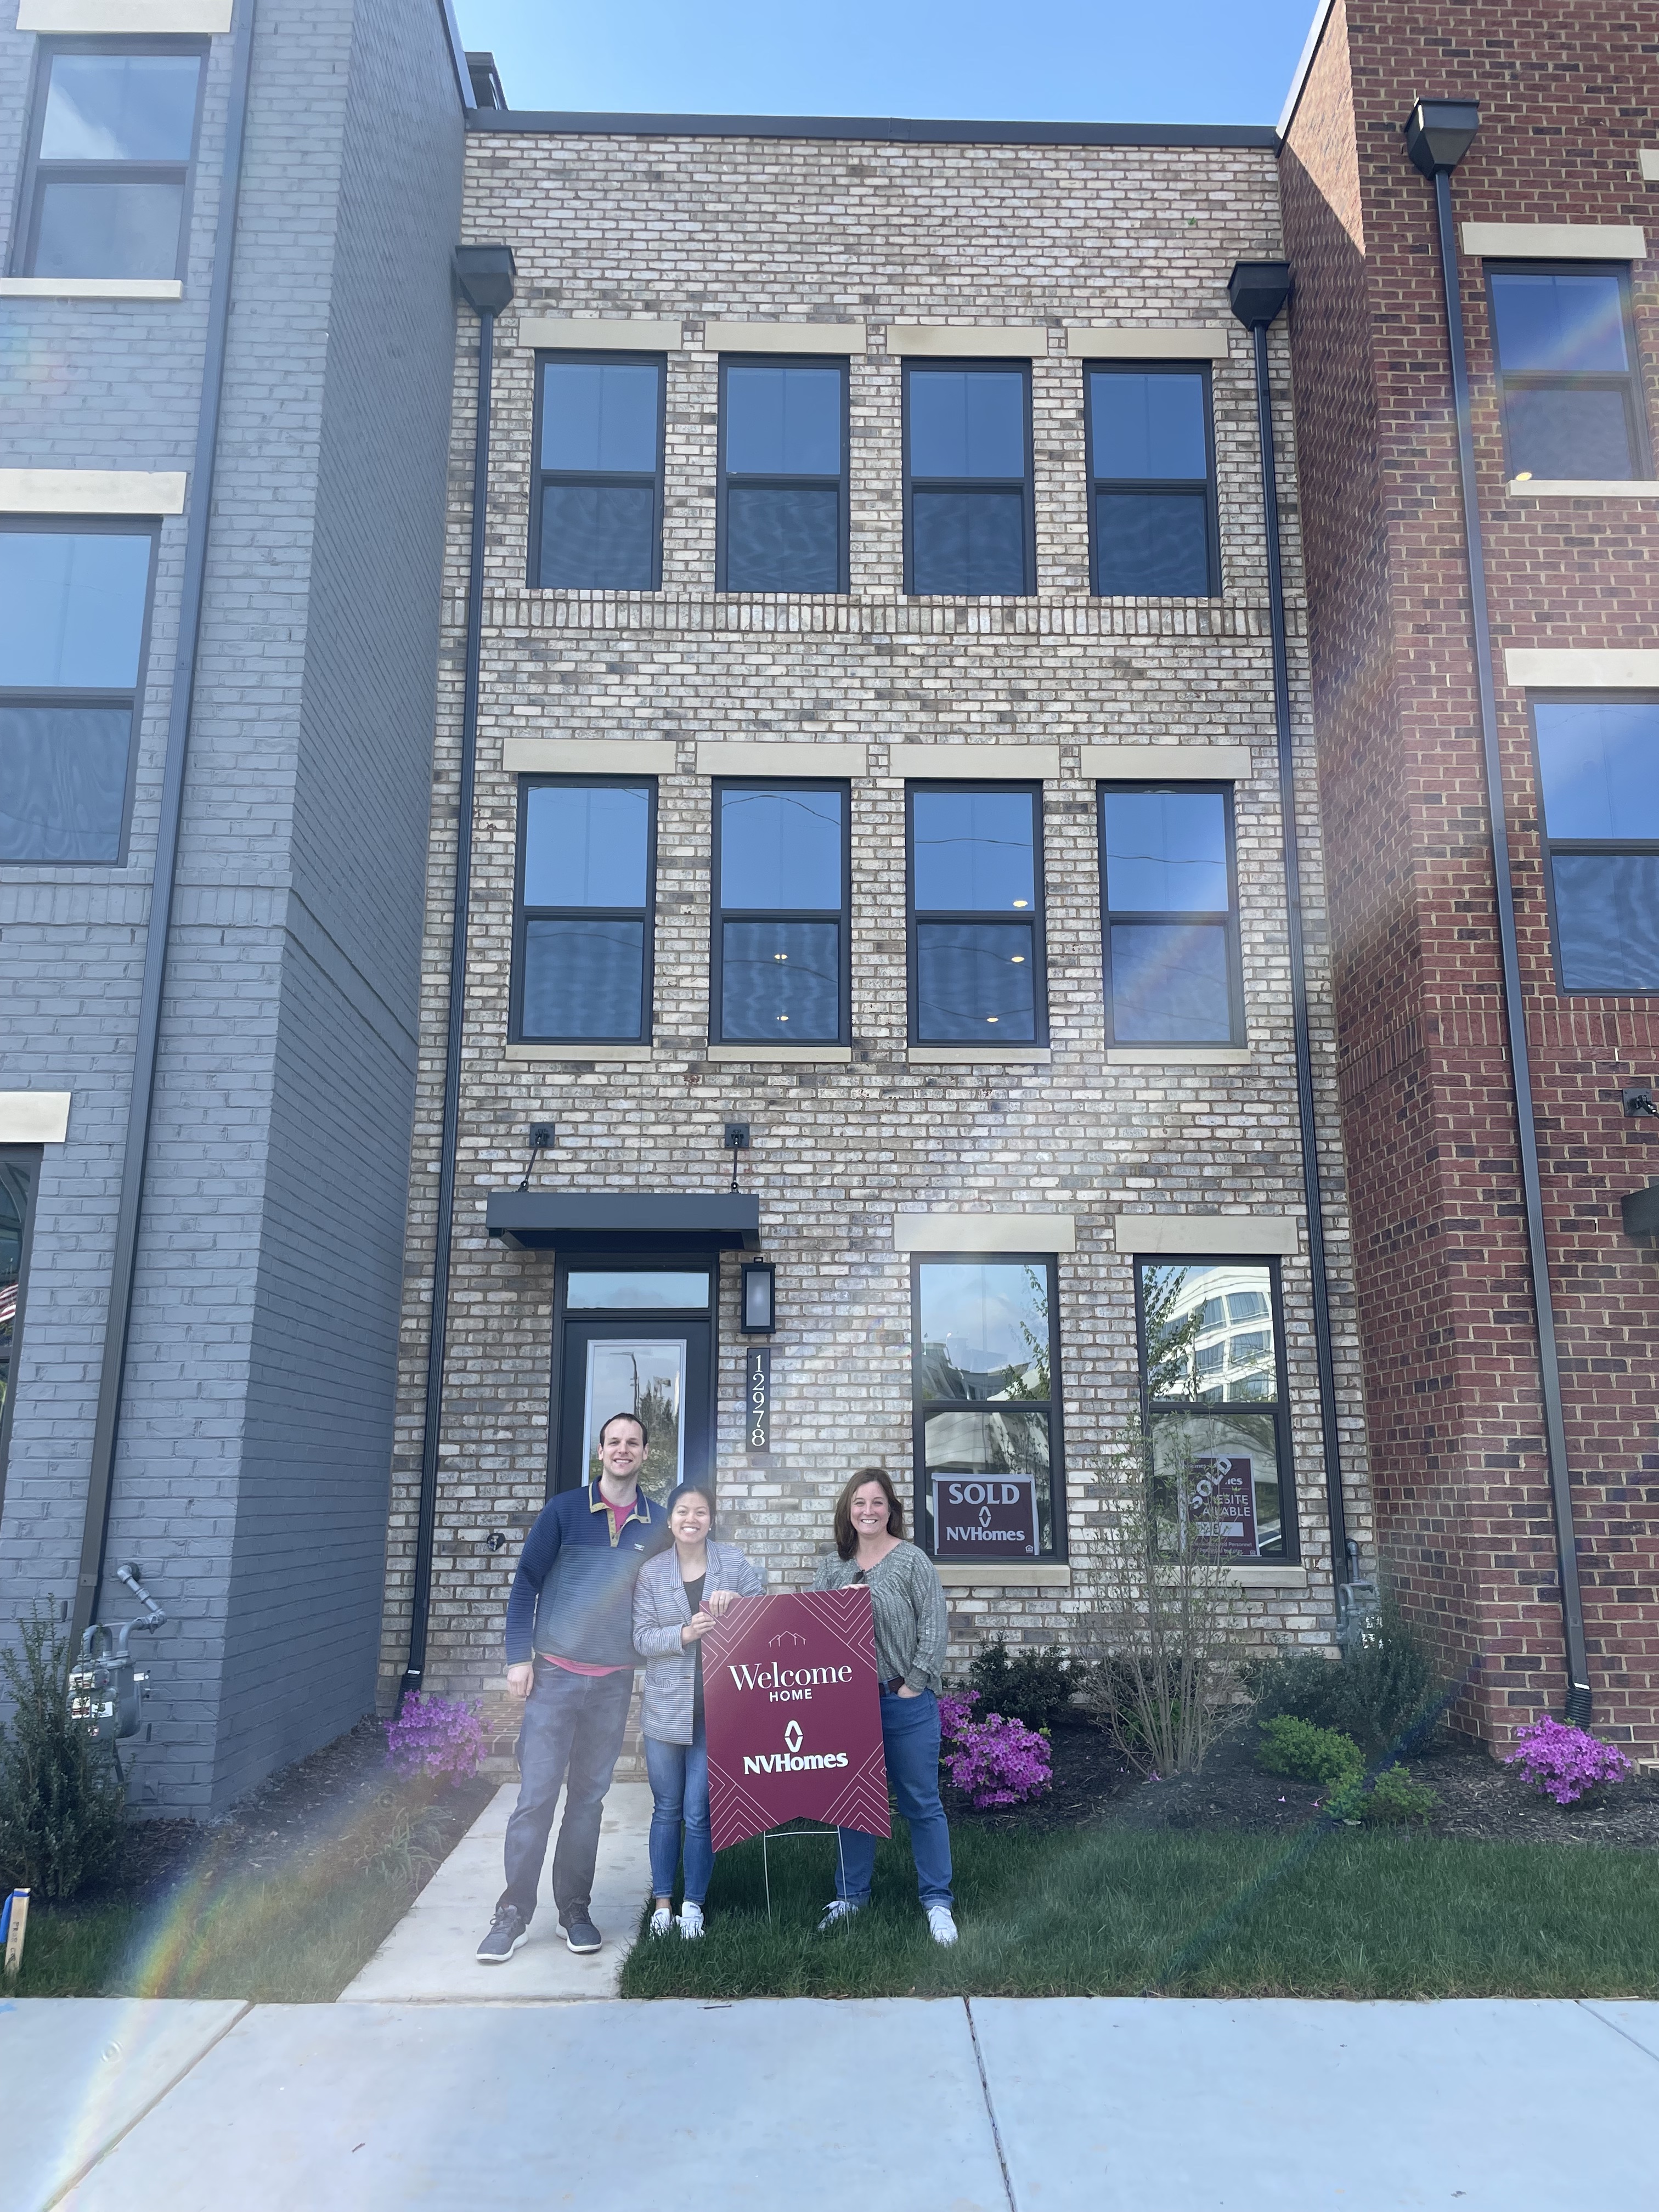 SOLD! 12978 Hattontown Sq. Herndon, VA 20171 $795,885 Congratulations from our very happy new build, first-time home buyers!